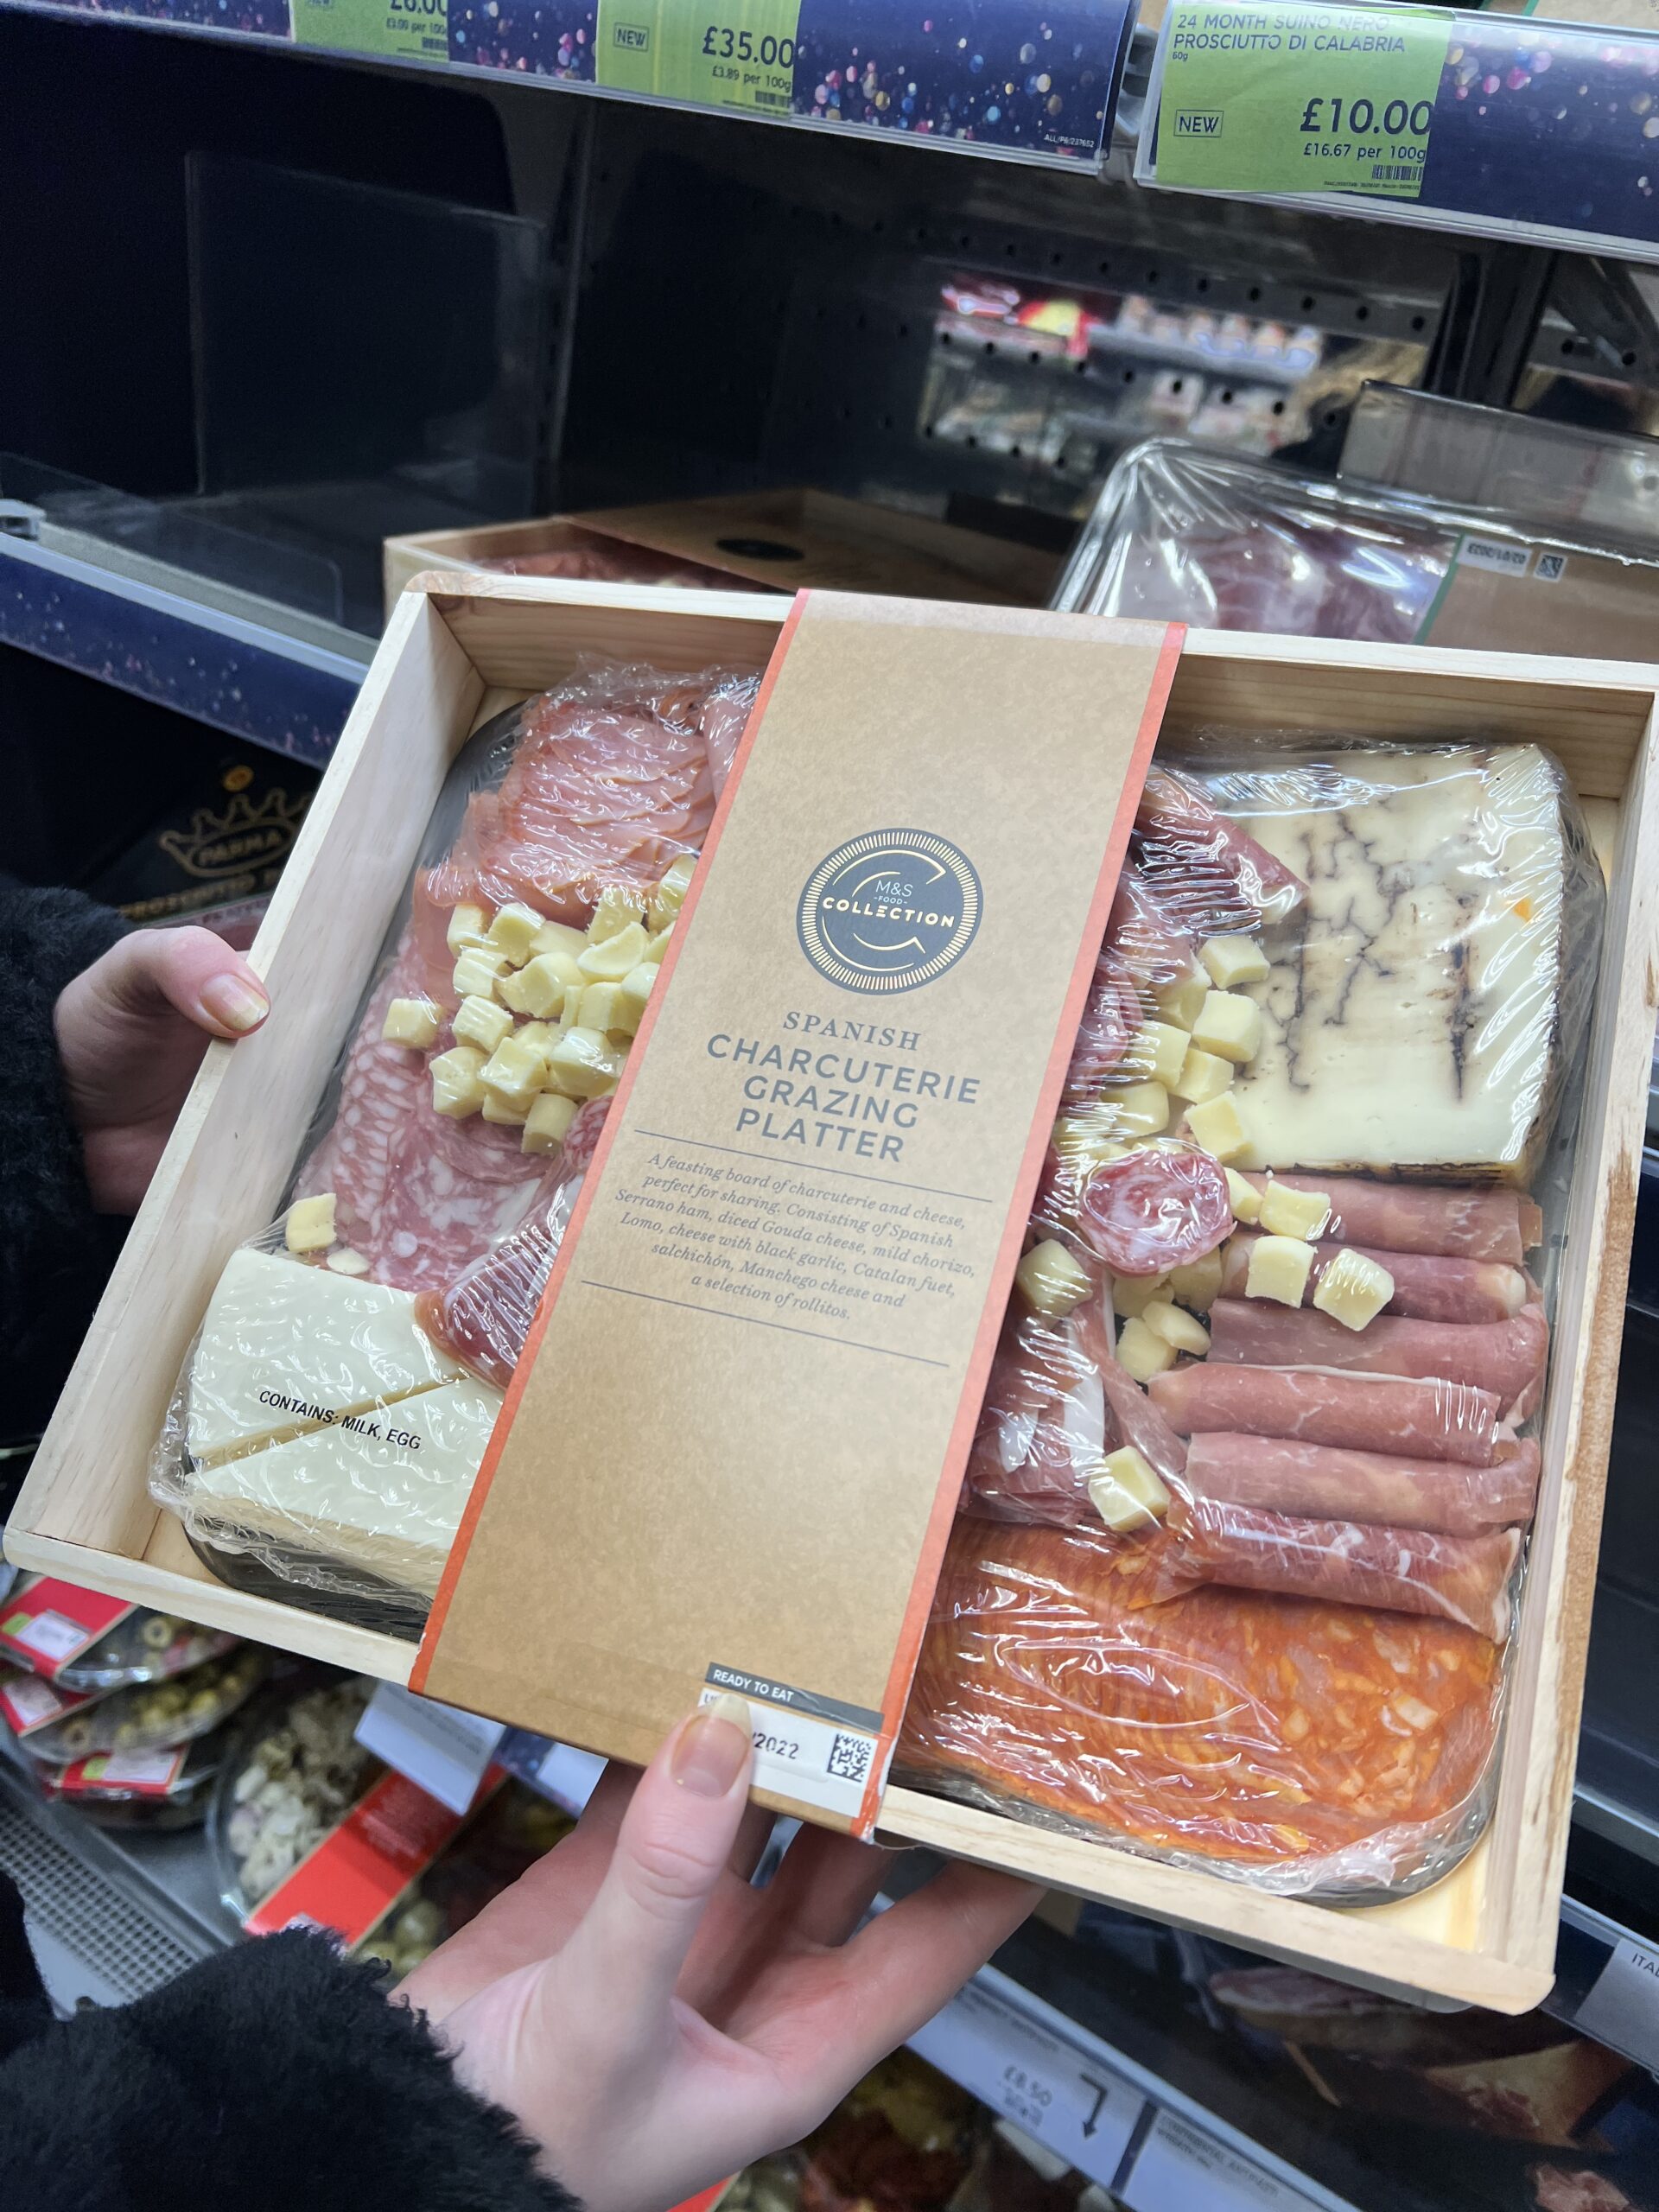 Charcuterie platter from M&S.